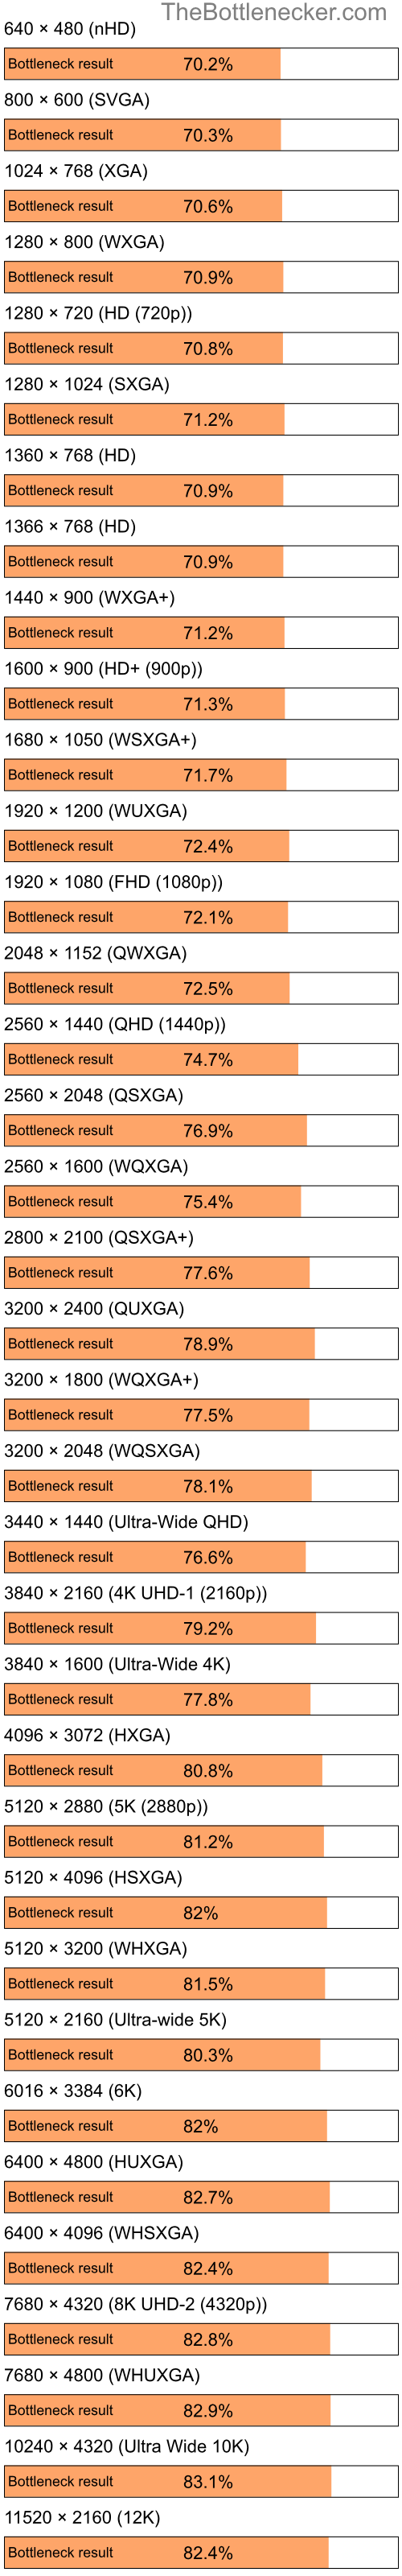 Bottleneck results by resolution for Intel Pentium 4 and AMD Mobility Radeon HD 3430 in Graphic Card Intense Tasks